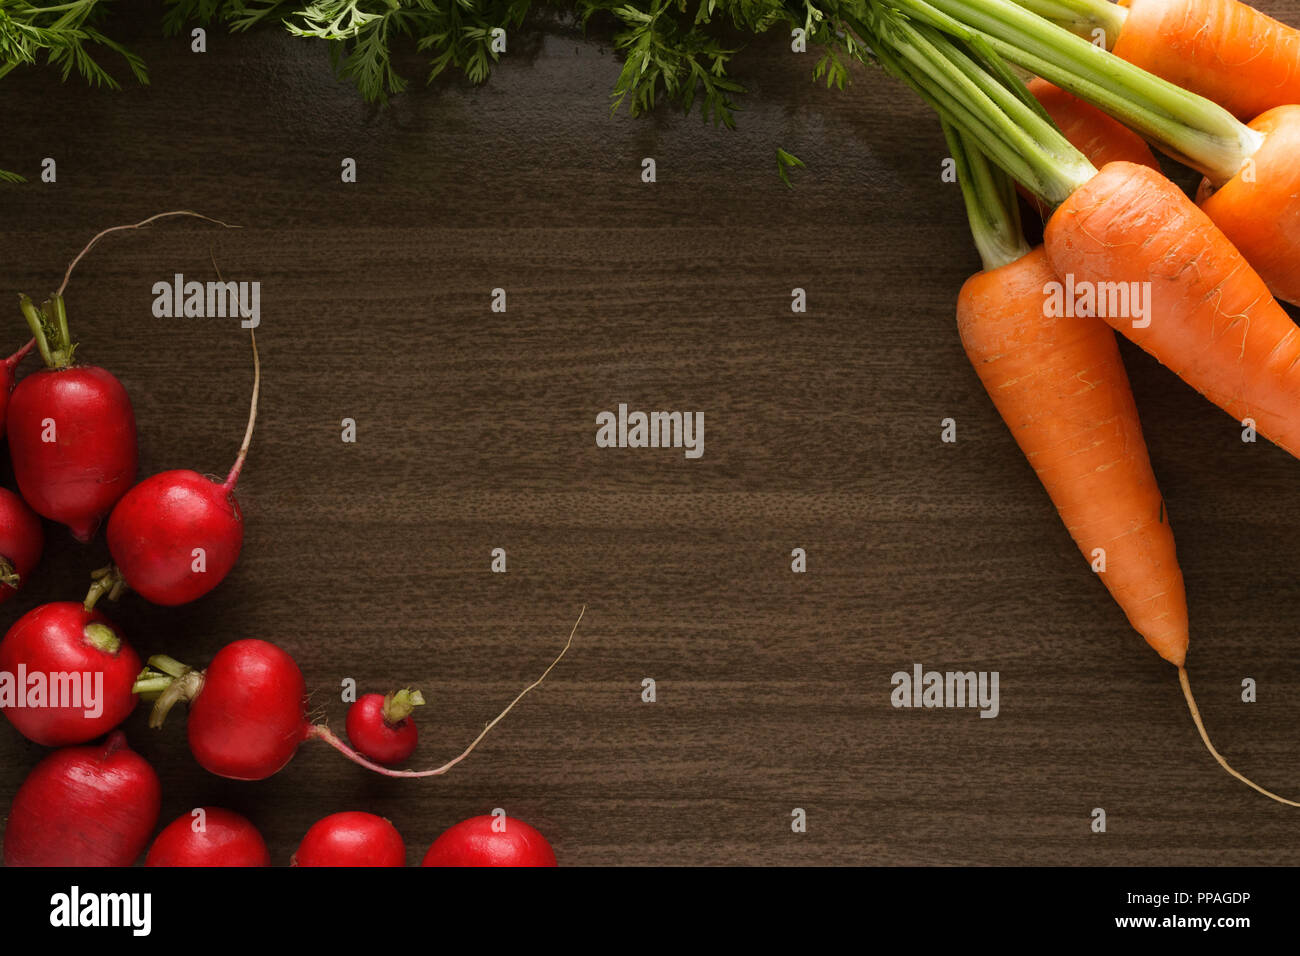 Salad ingredients on a flat dark brown wooden board. Carrots and radishes, top view, with copy space for text. Stock Photo